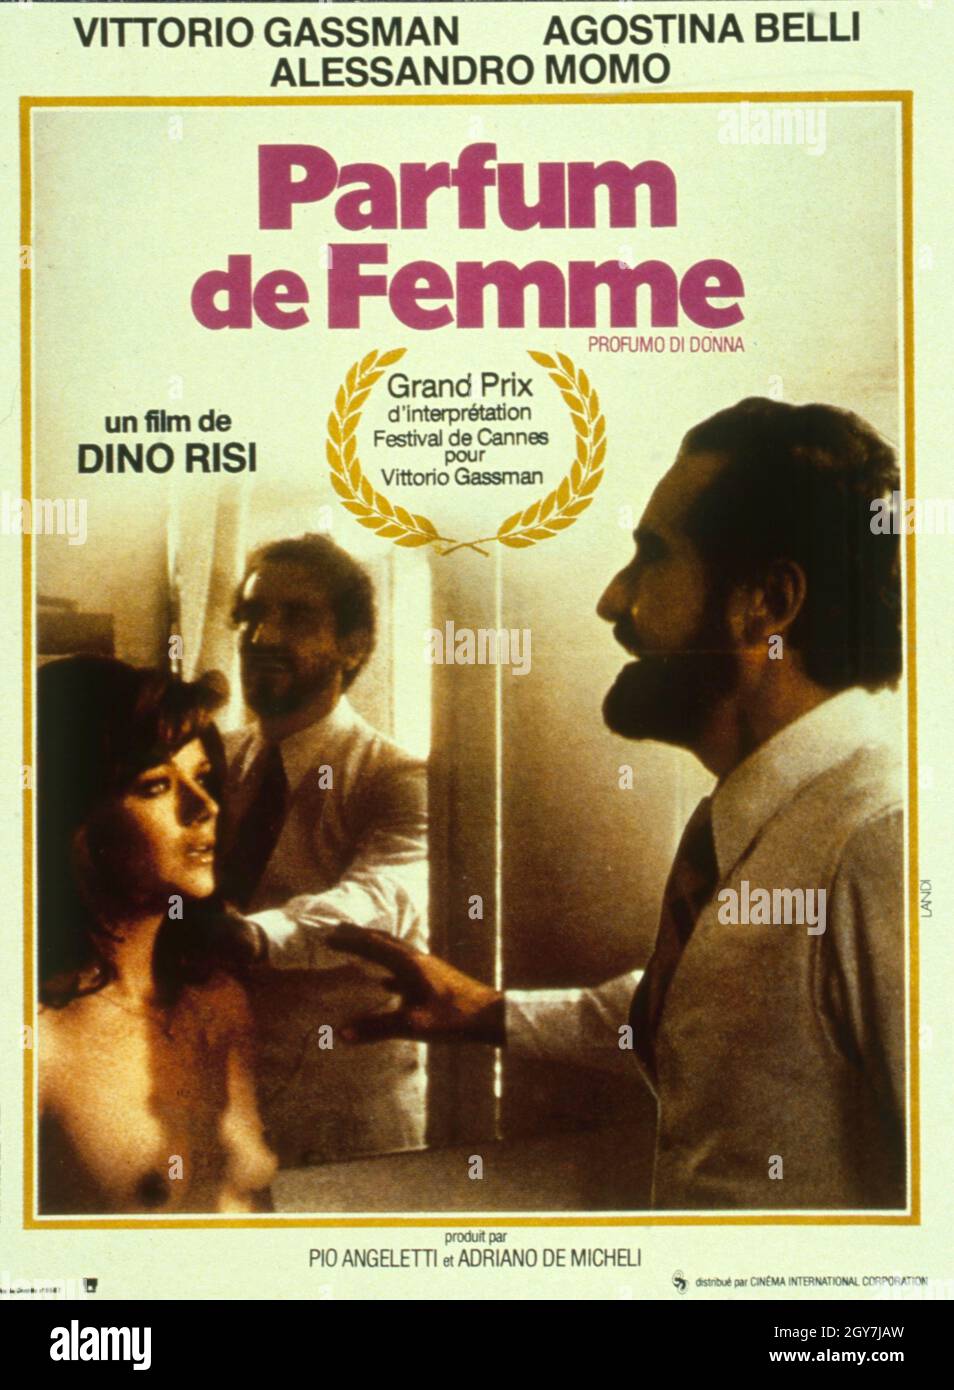 Profumo di donna  Scent of a woman Year: 1974 - Italy Director: Dino Risi French poster Stock Photo